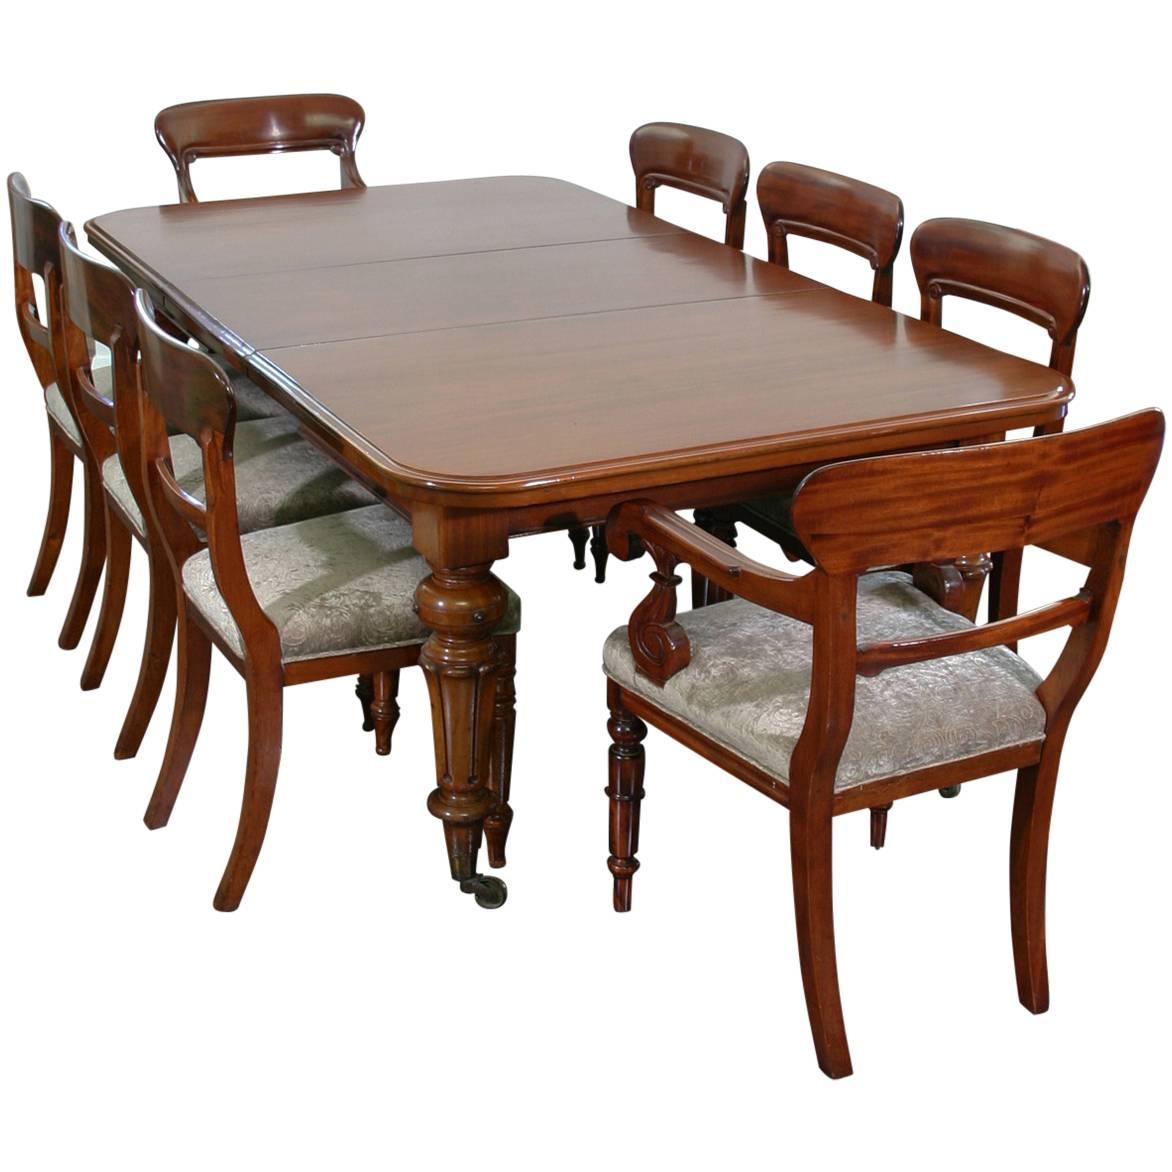 Mid-19th Century English Mahogany Dining Suite For Sale